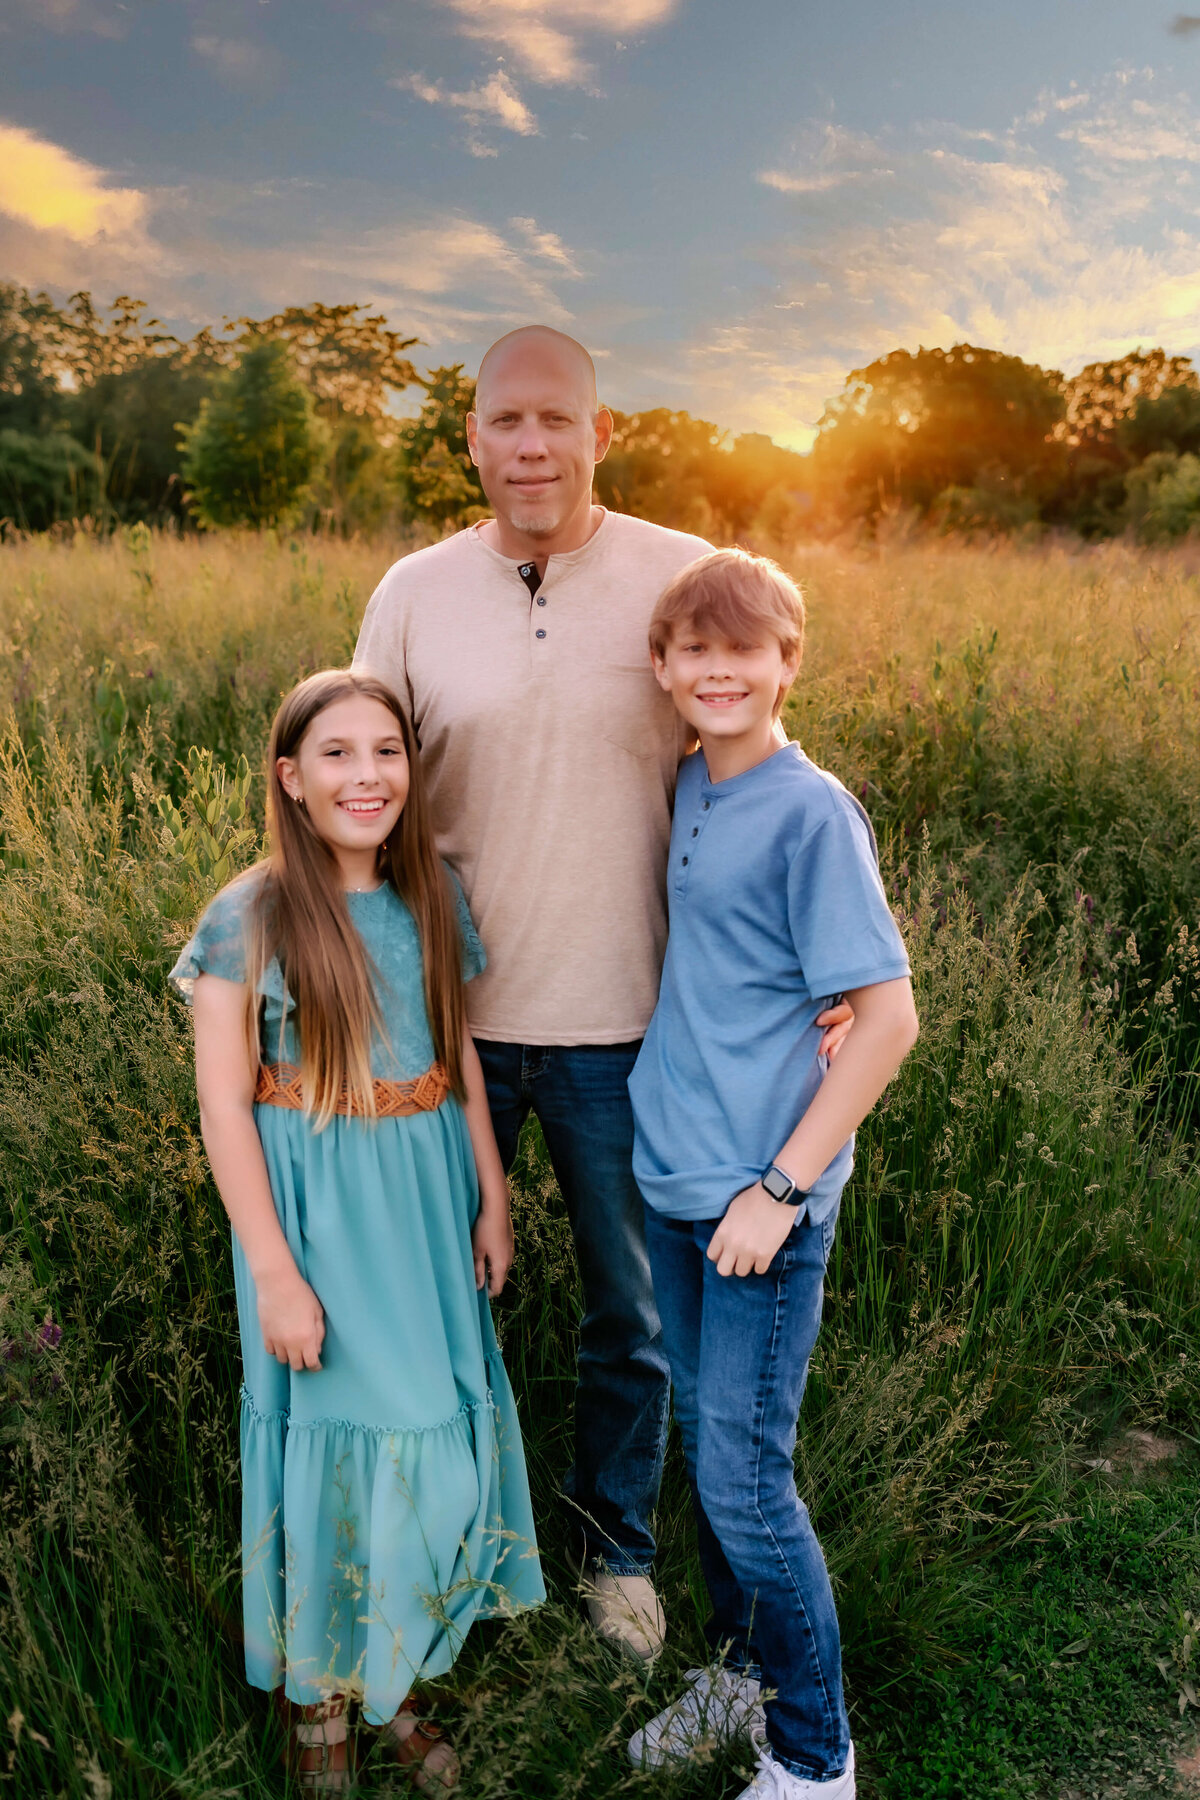 A father and his two kids pose for their family photo session in a field at sunset.